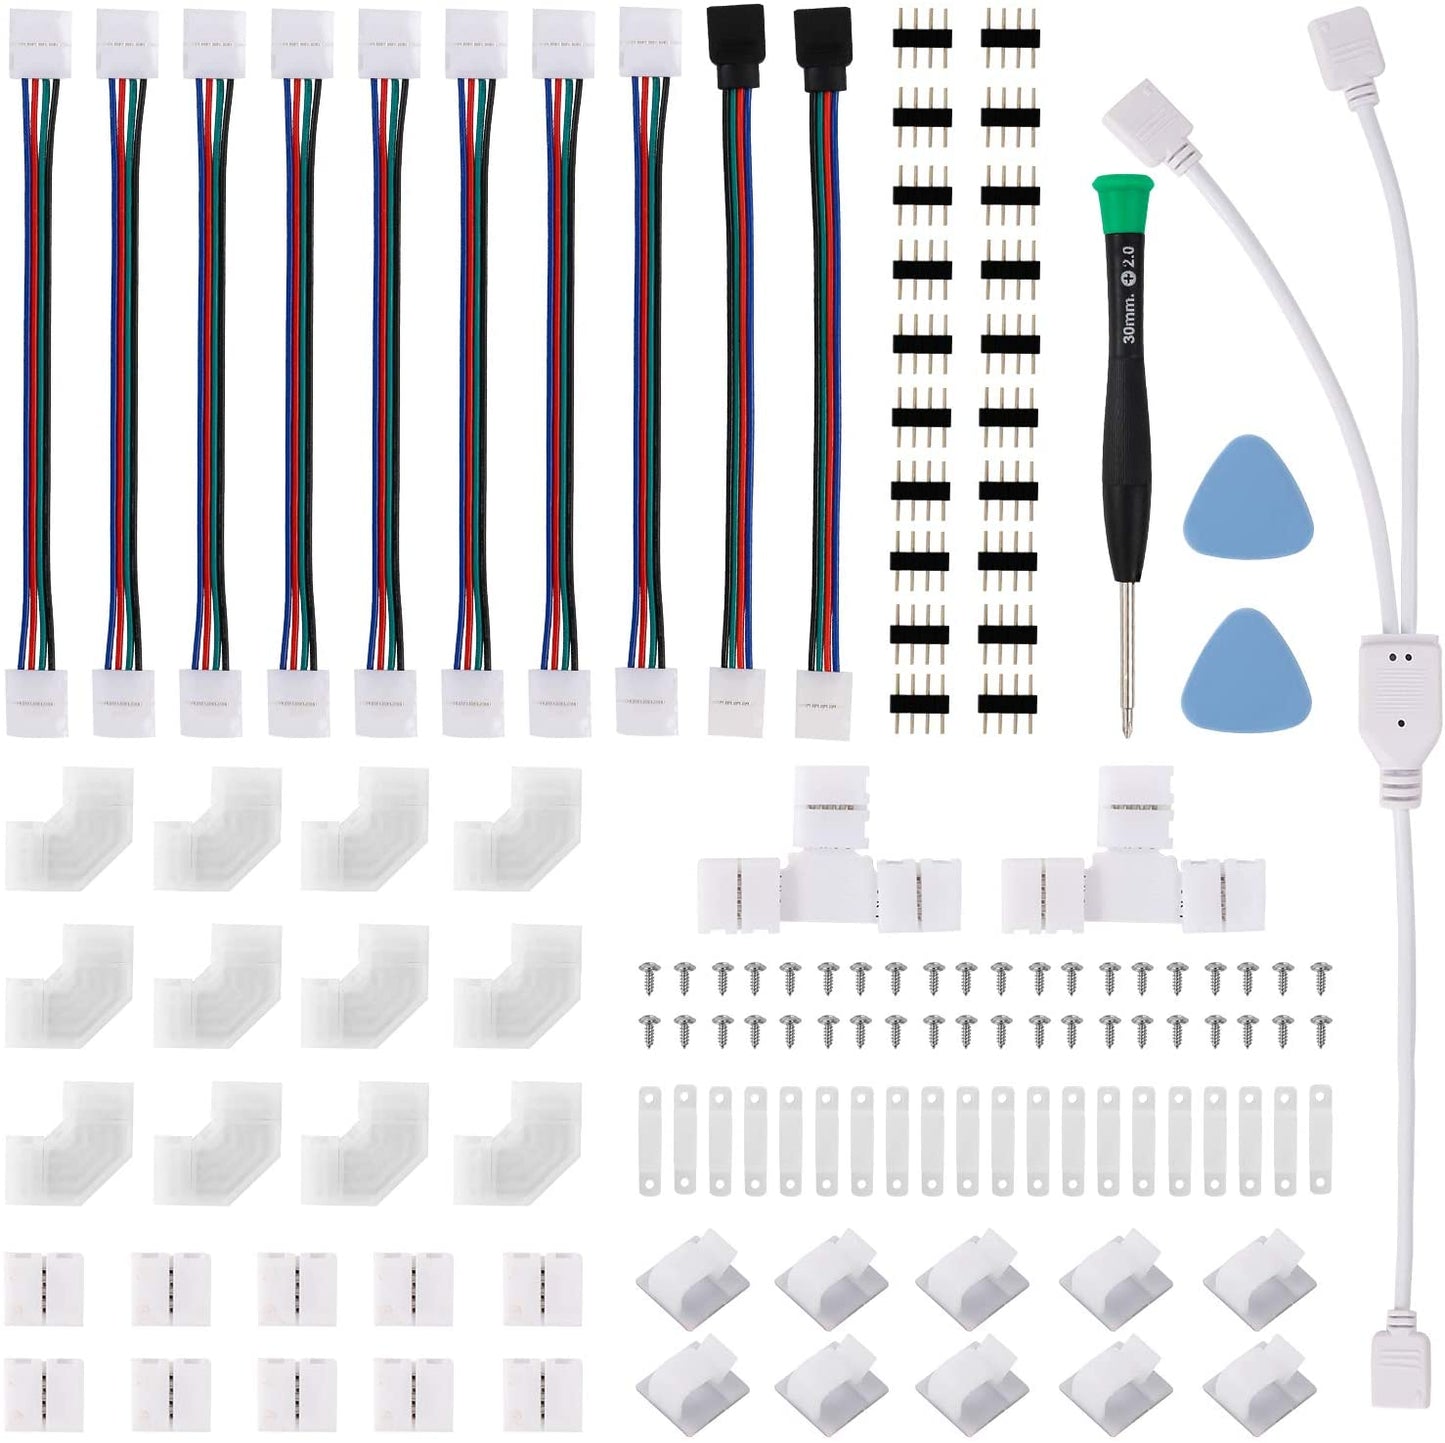 LED Strip Light Connector Kit, Led Strip Accessories Set for 5050 4 Pin 10mm RGB Led Light Strips with Connectors Clips and Tools - (For 8 piece(s))